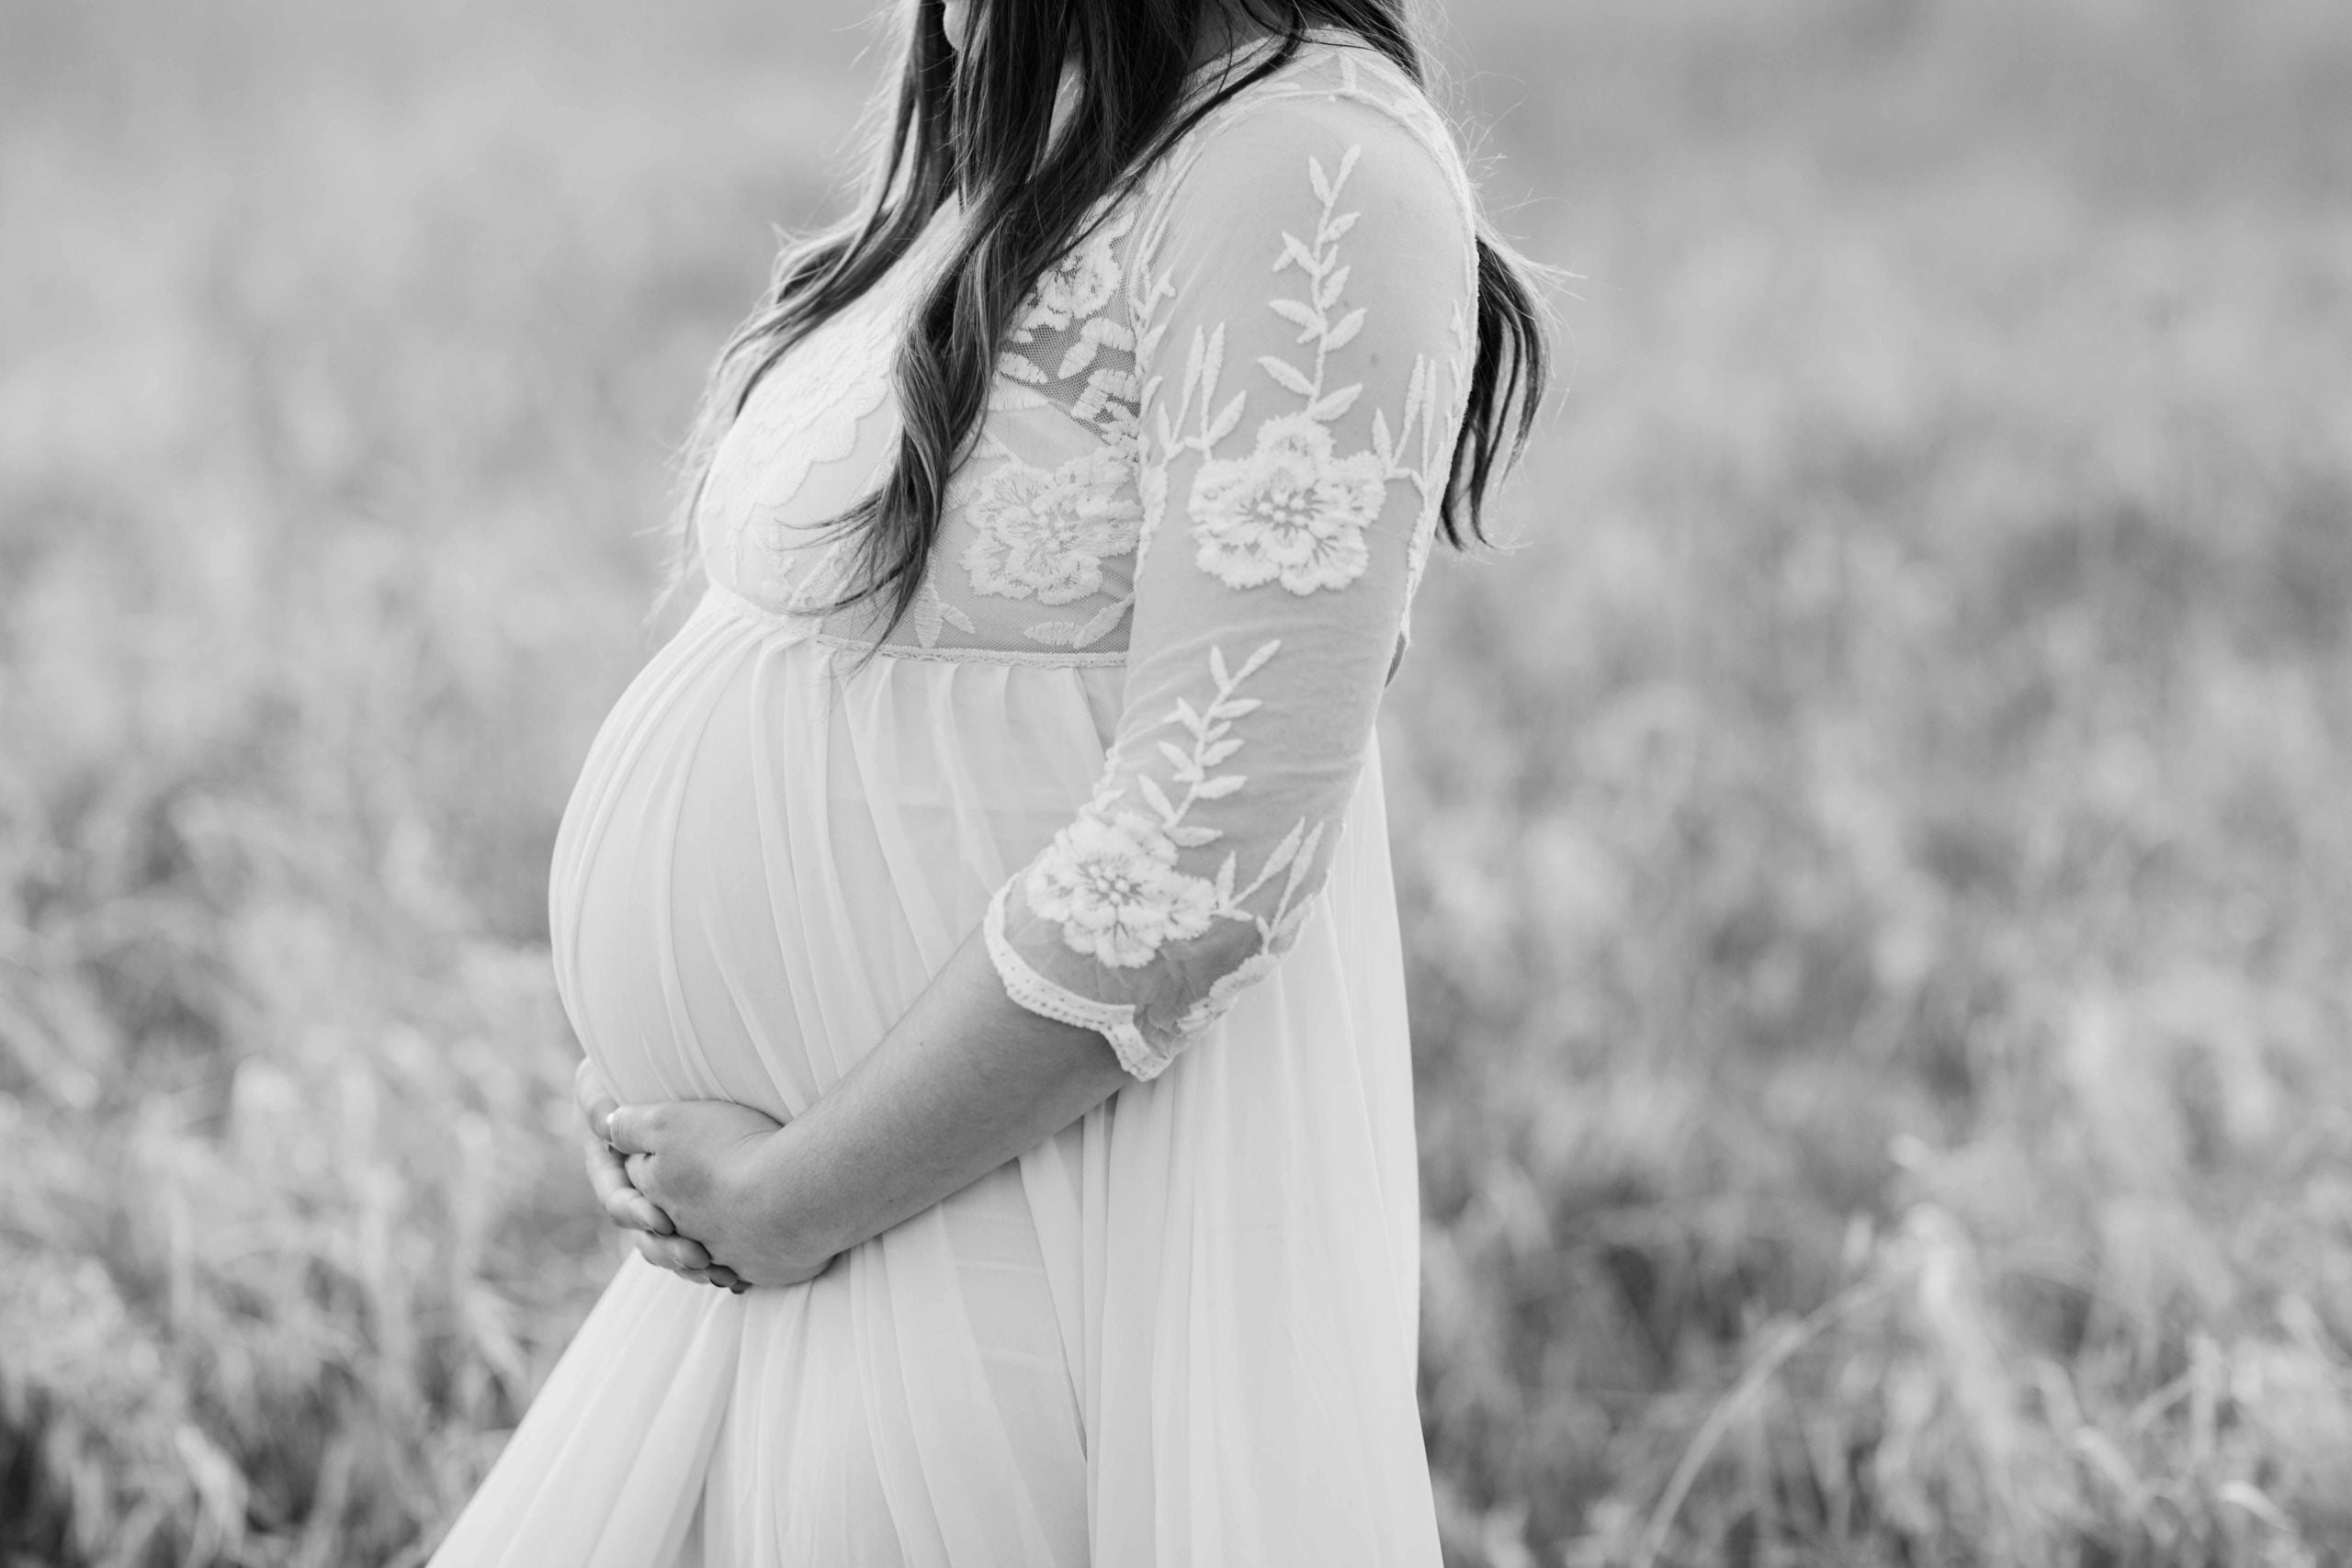 Outdoor Golden Hour Geneva Illinois Maternity Photoshoot bright and airy black and white